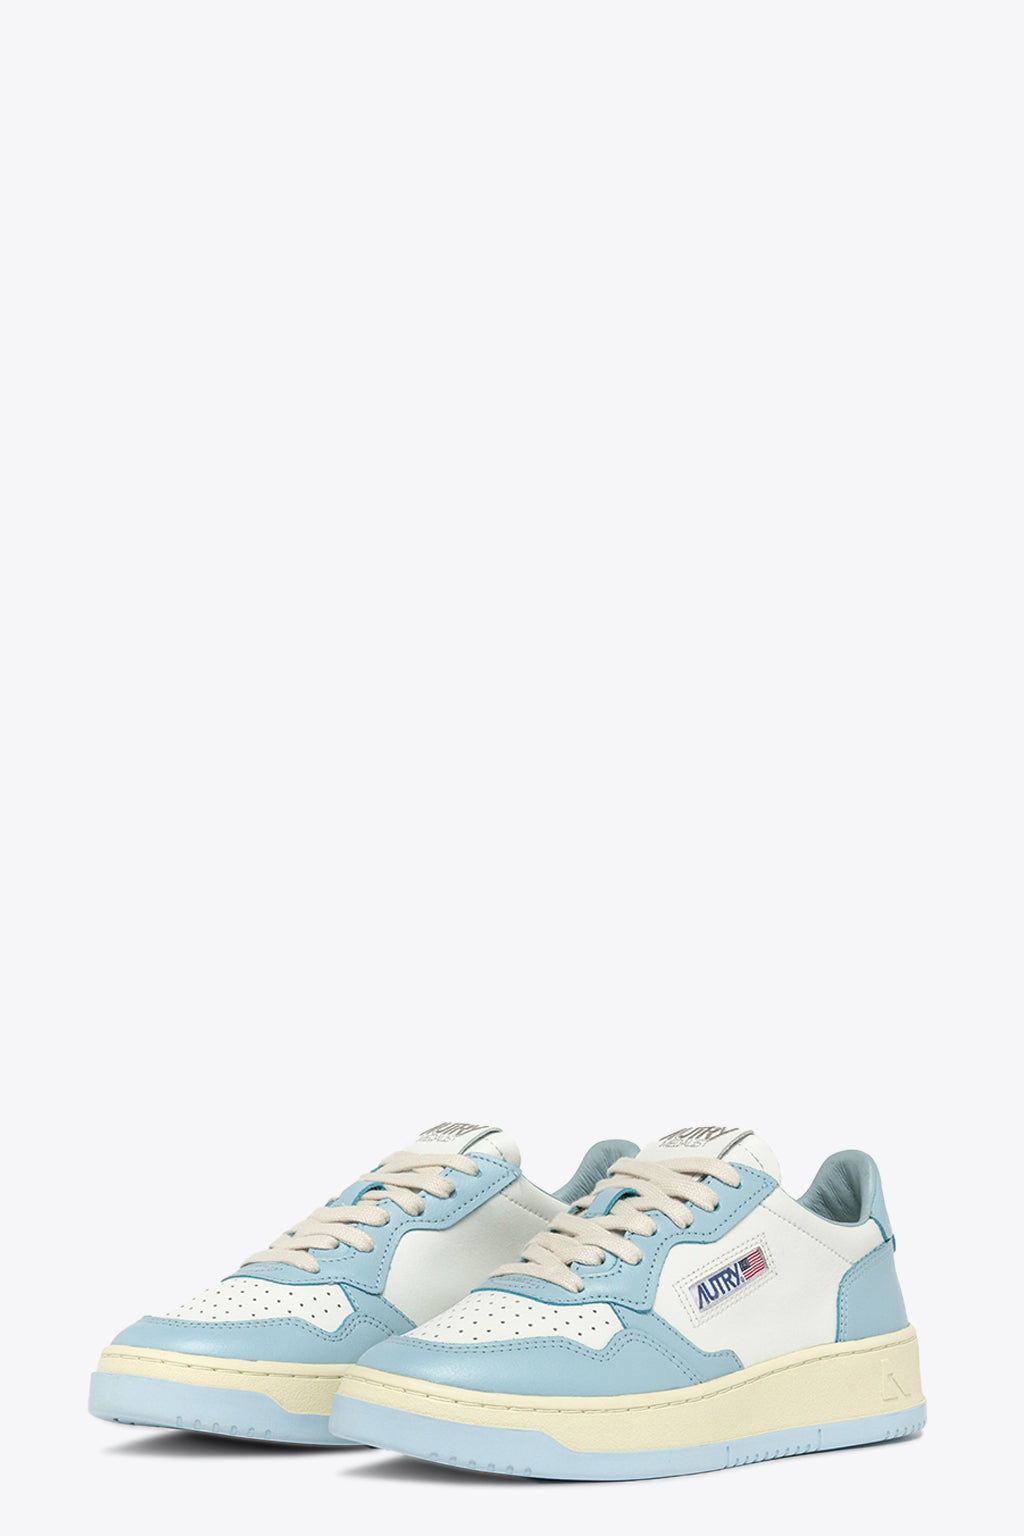 alt-image__Light-blue-and-white-leather-low-sneaker---Medalist